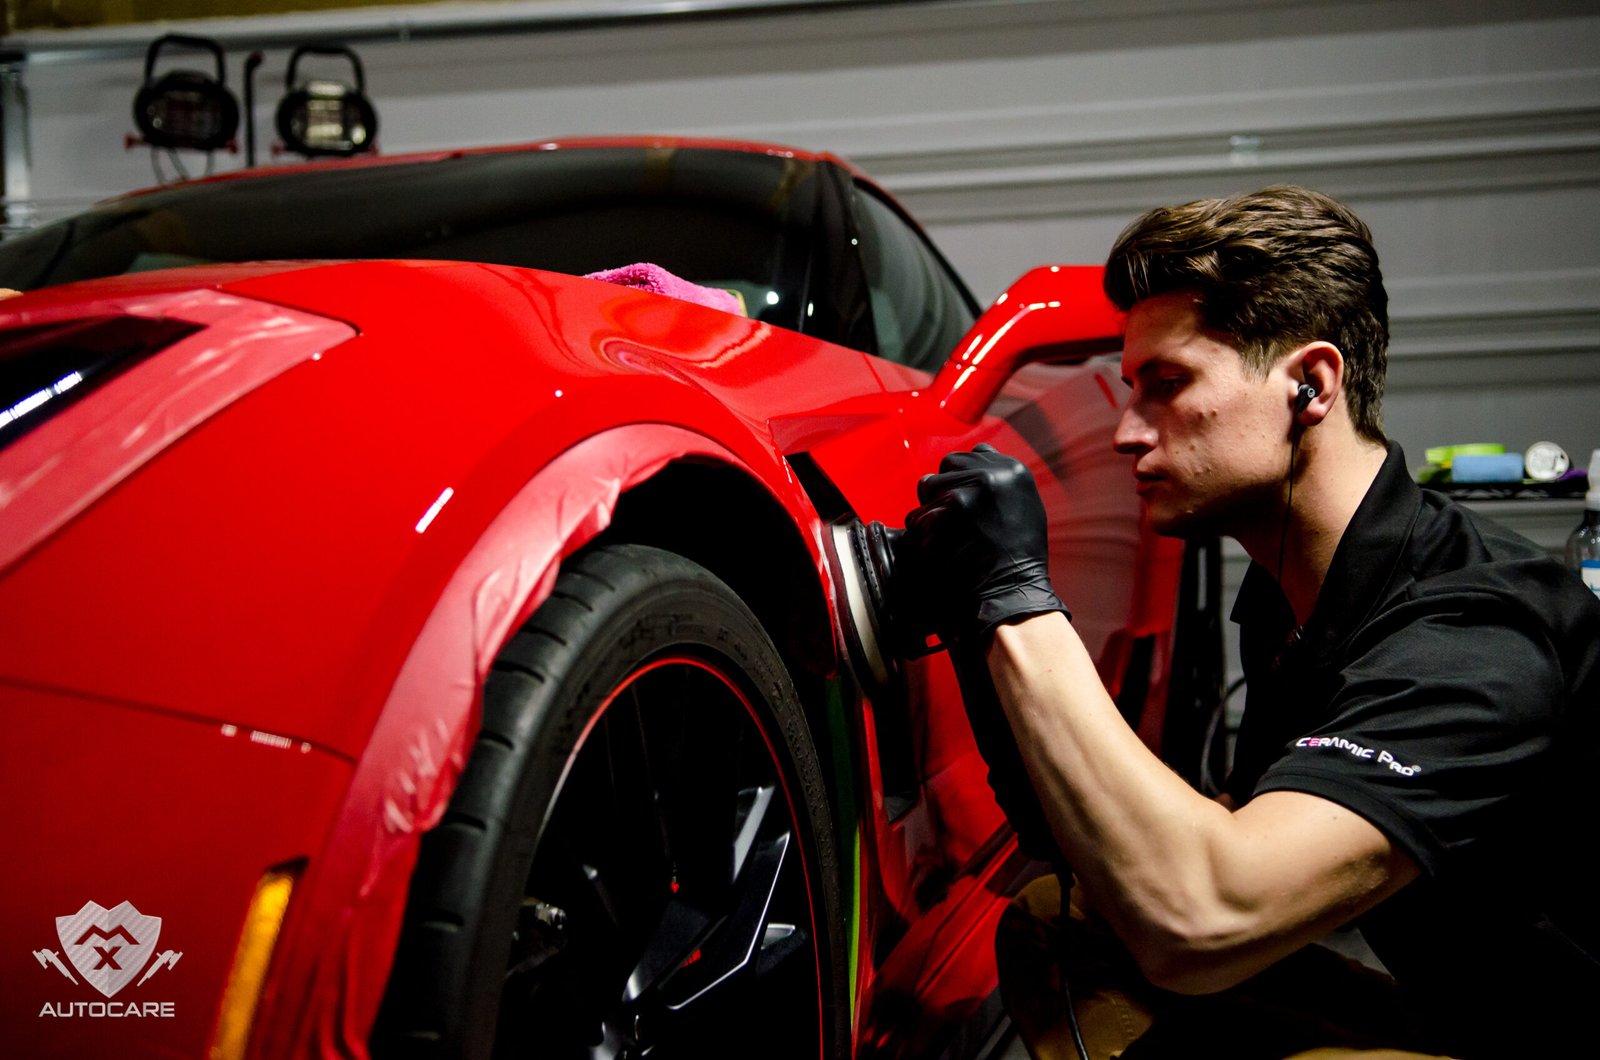 How is getting a professional car detailing service beneficial to you